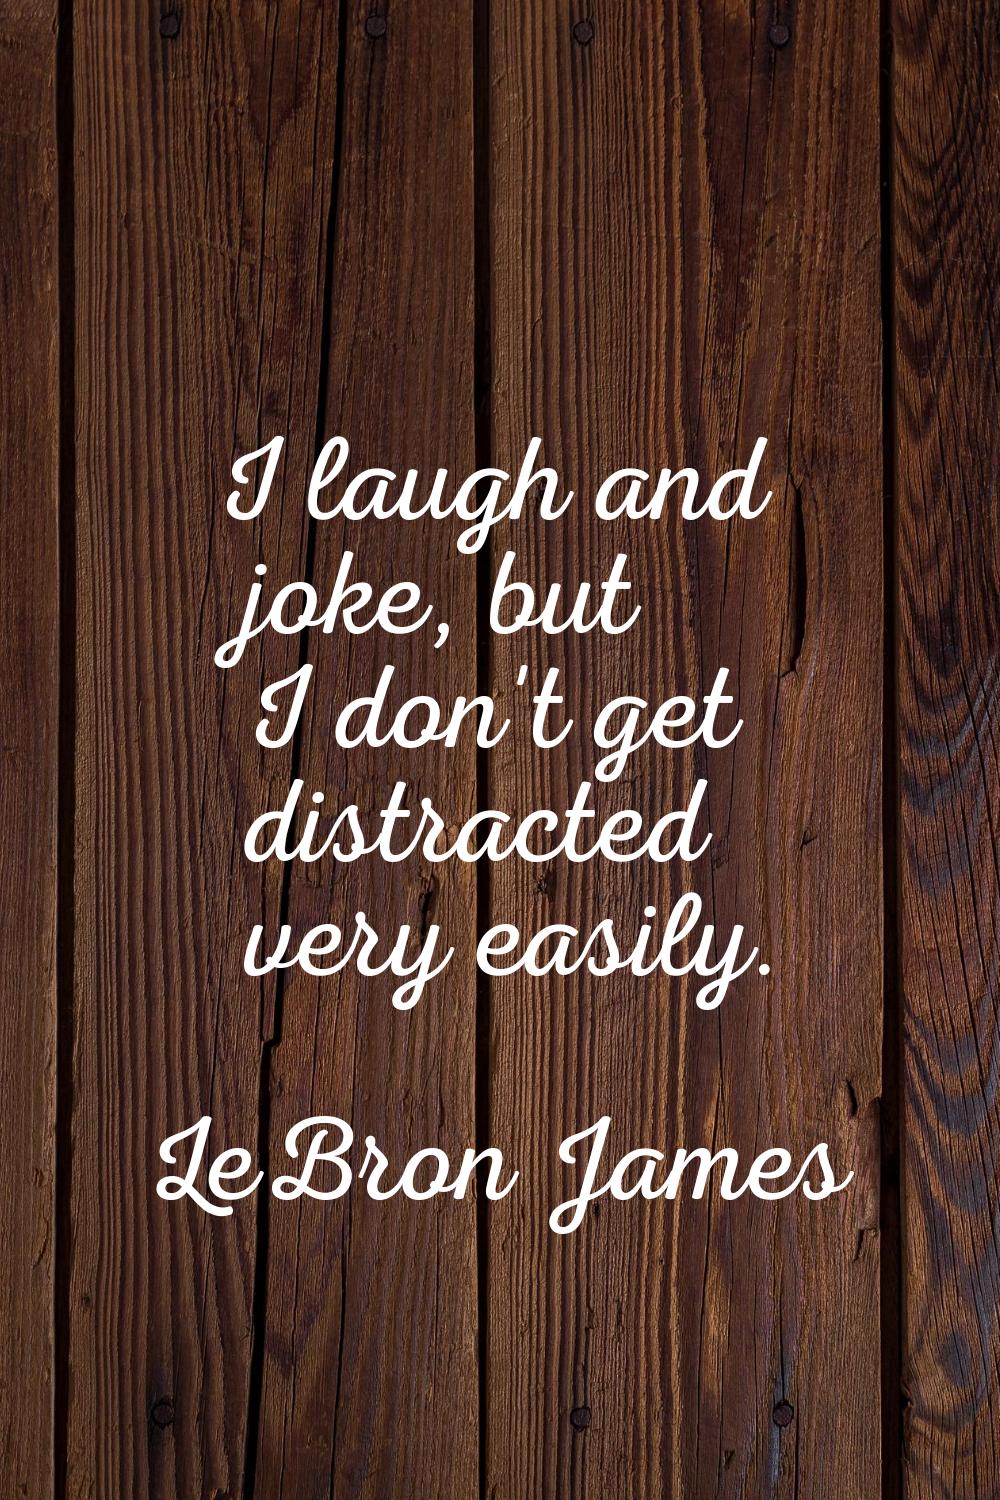 I laugh and joke, but I don't get distracted very easily.